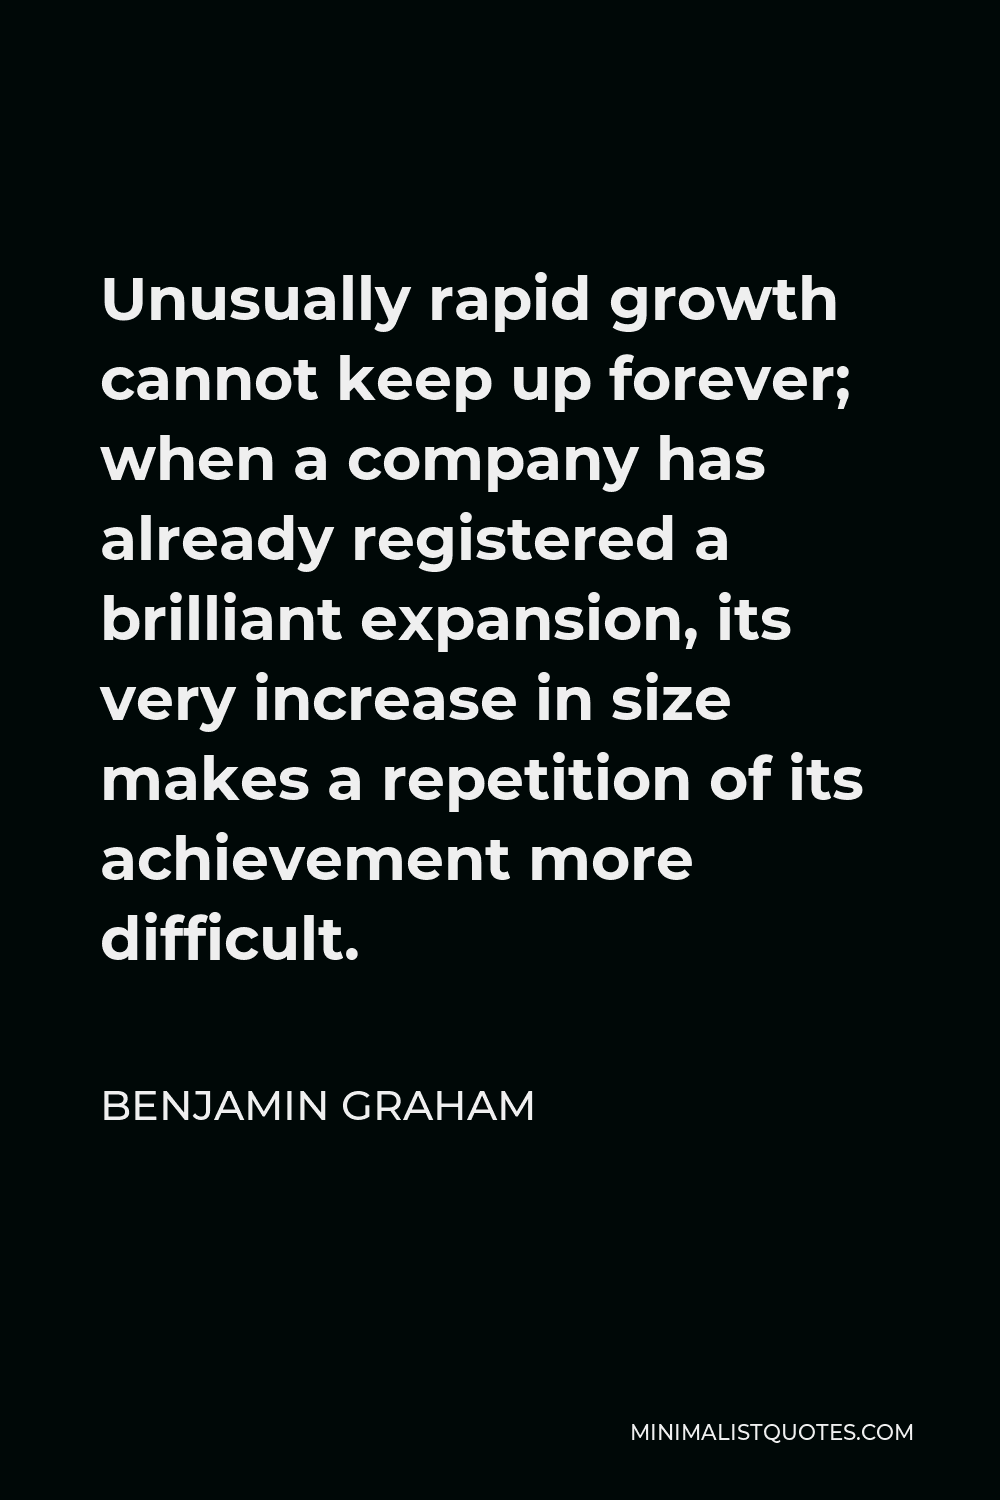 Benjamin Graham Quote - Unusually rapid growth cannot keep up forever; when a company has already registered a brilliant expansion, its very increase in size makes a repetition of its achievement more difficult.